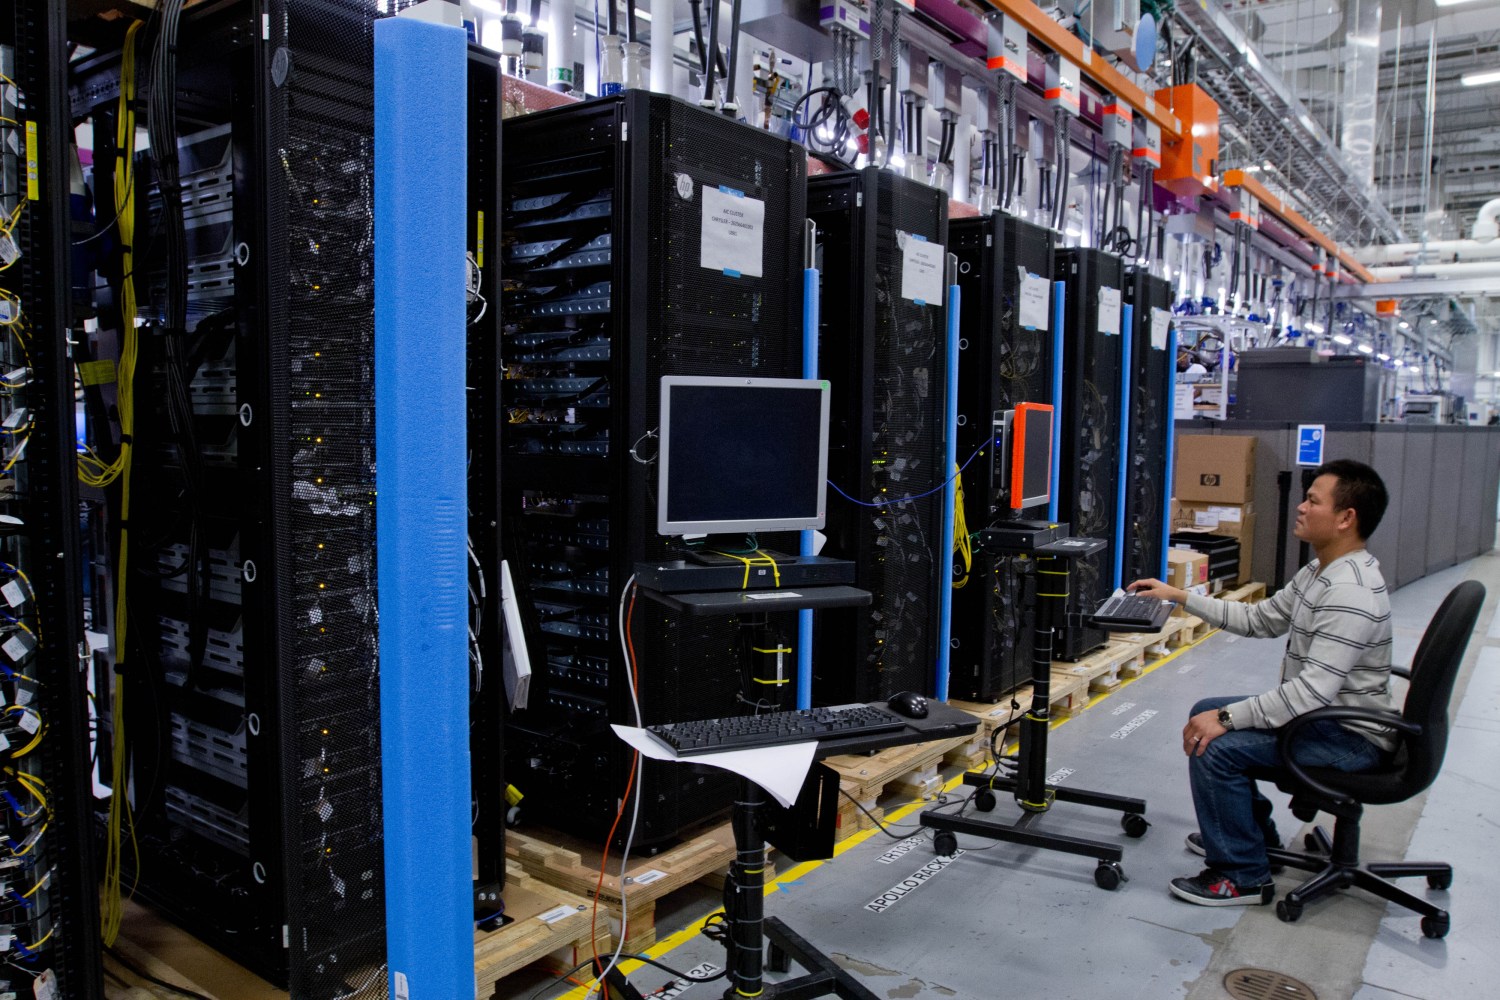 Hewlett-Packard ProLiant commercial data servers destined for cloud computing are assembled by workers at a company manufacturing facility in Houston November 19, 2013. REUTERS/Donna Carson (UNITED STATES - Tags: BUSINESS SCIENCE TECHNOLOGY)